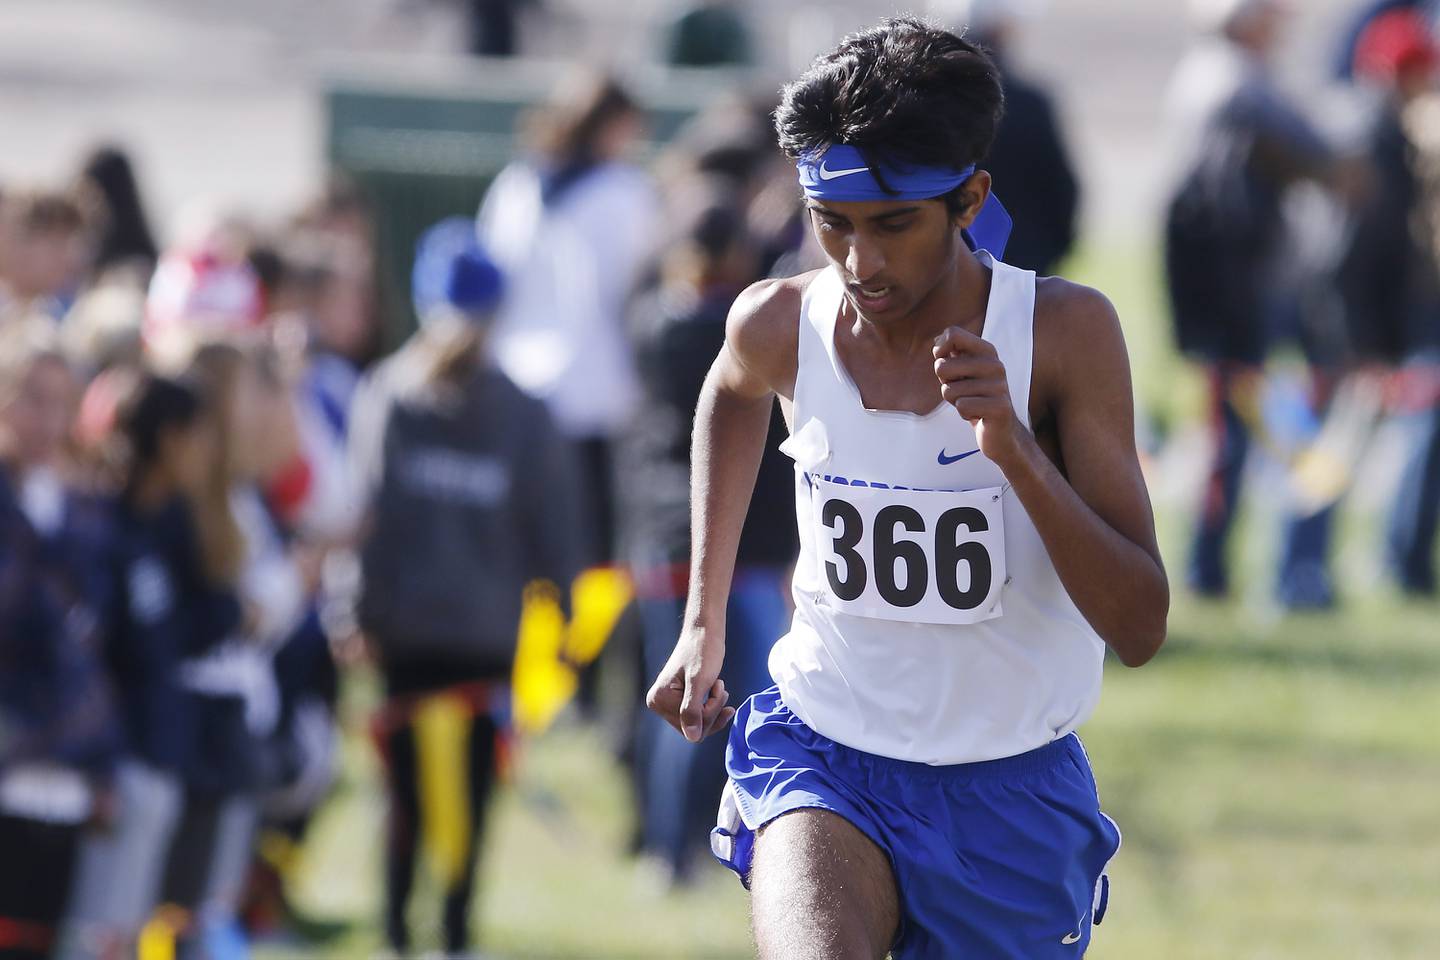 Woodstock's Ishan Patel heads for the finish line to place 13th during the boys Class 2A Woodstock North XC Sectional at Emricson Park on Saturday, Oct. 30, 2021 in Woodstock.